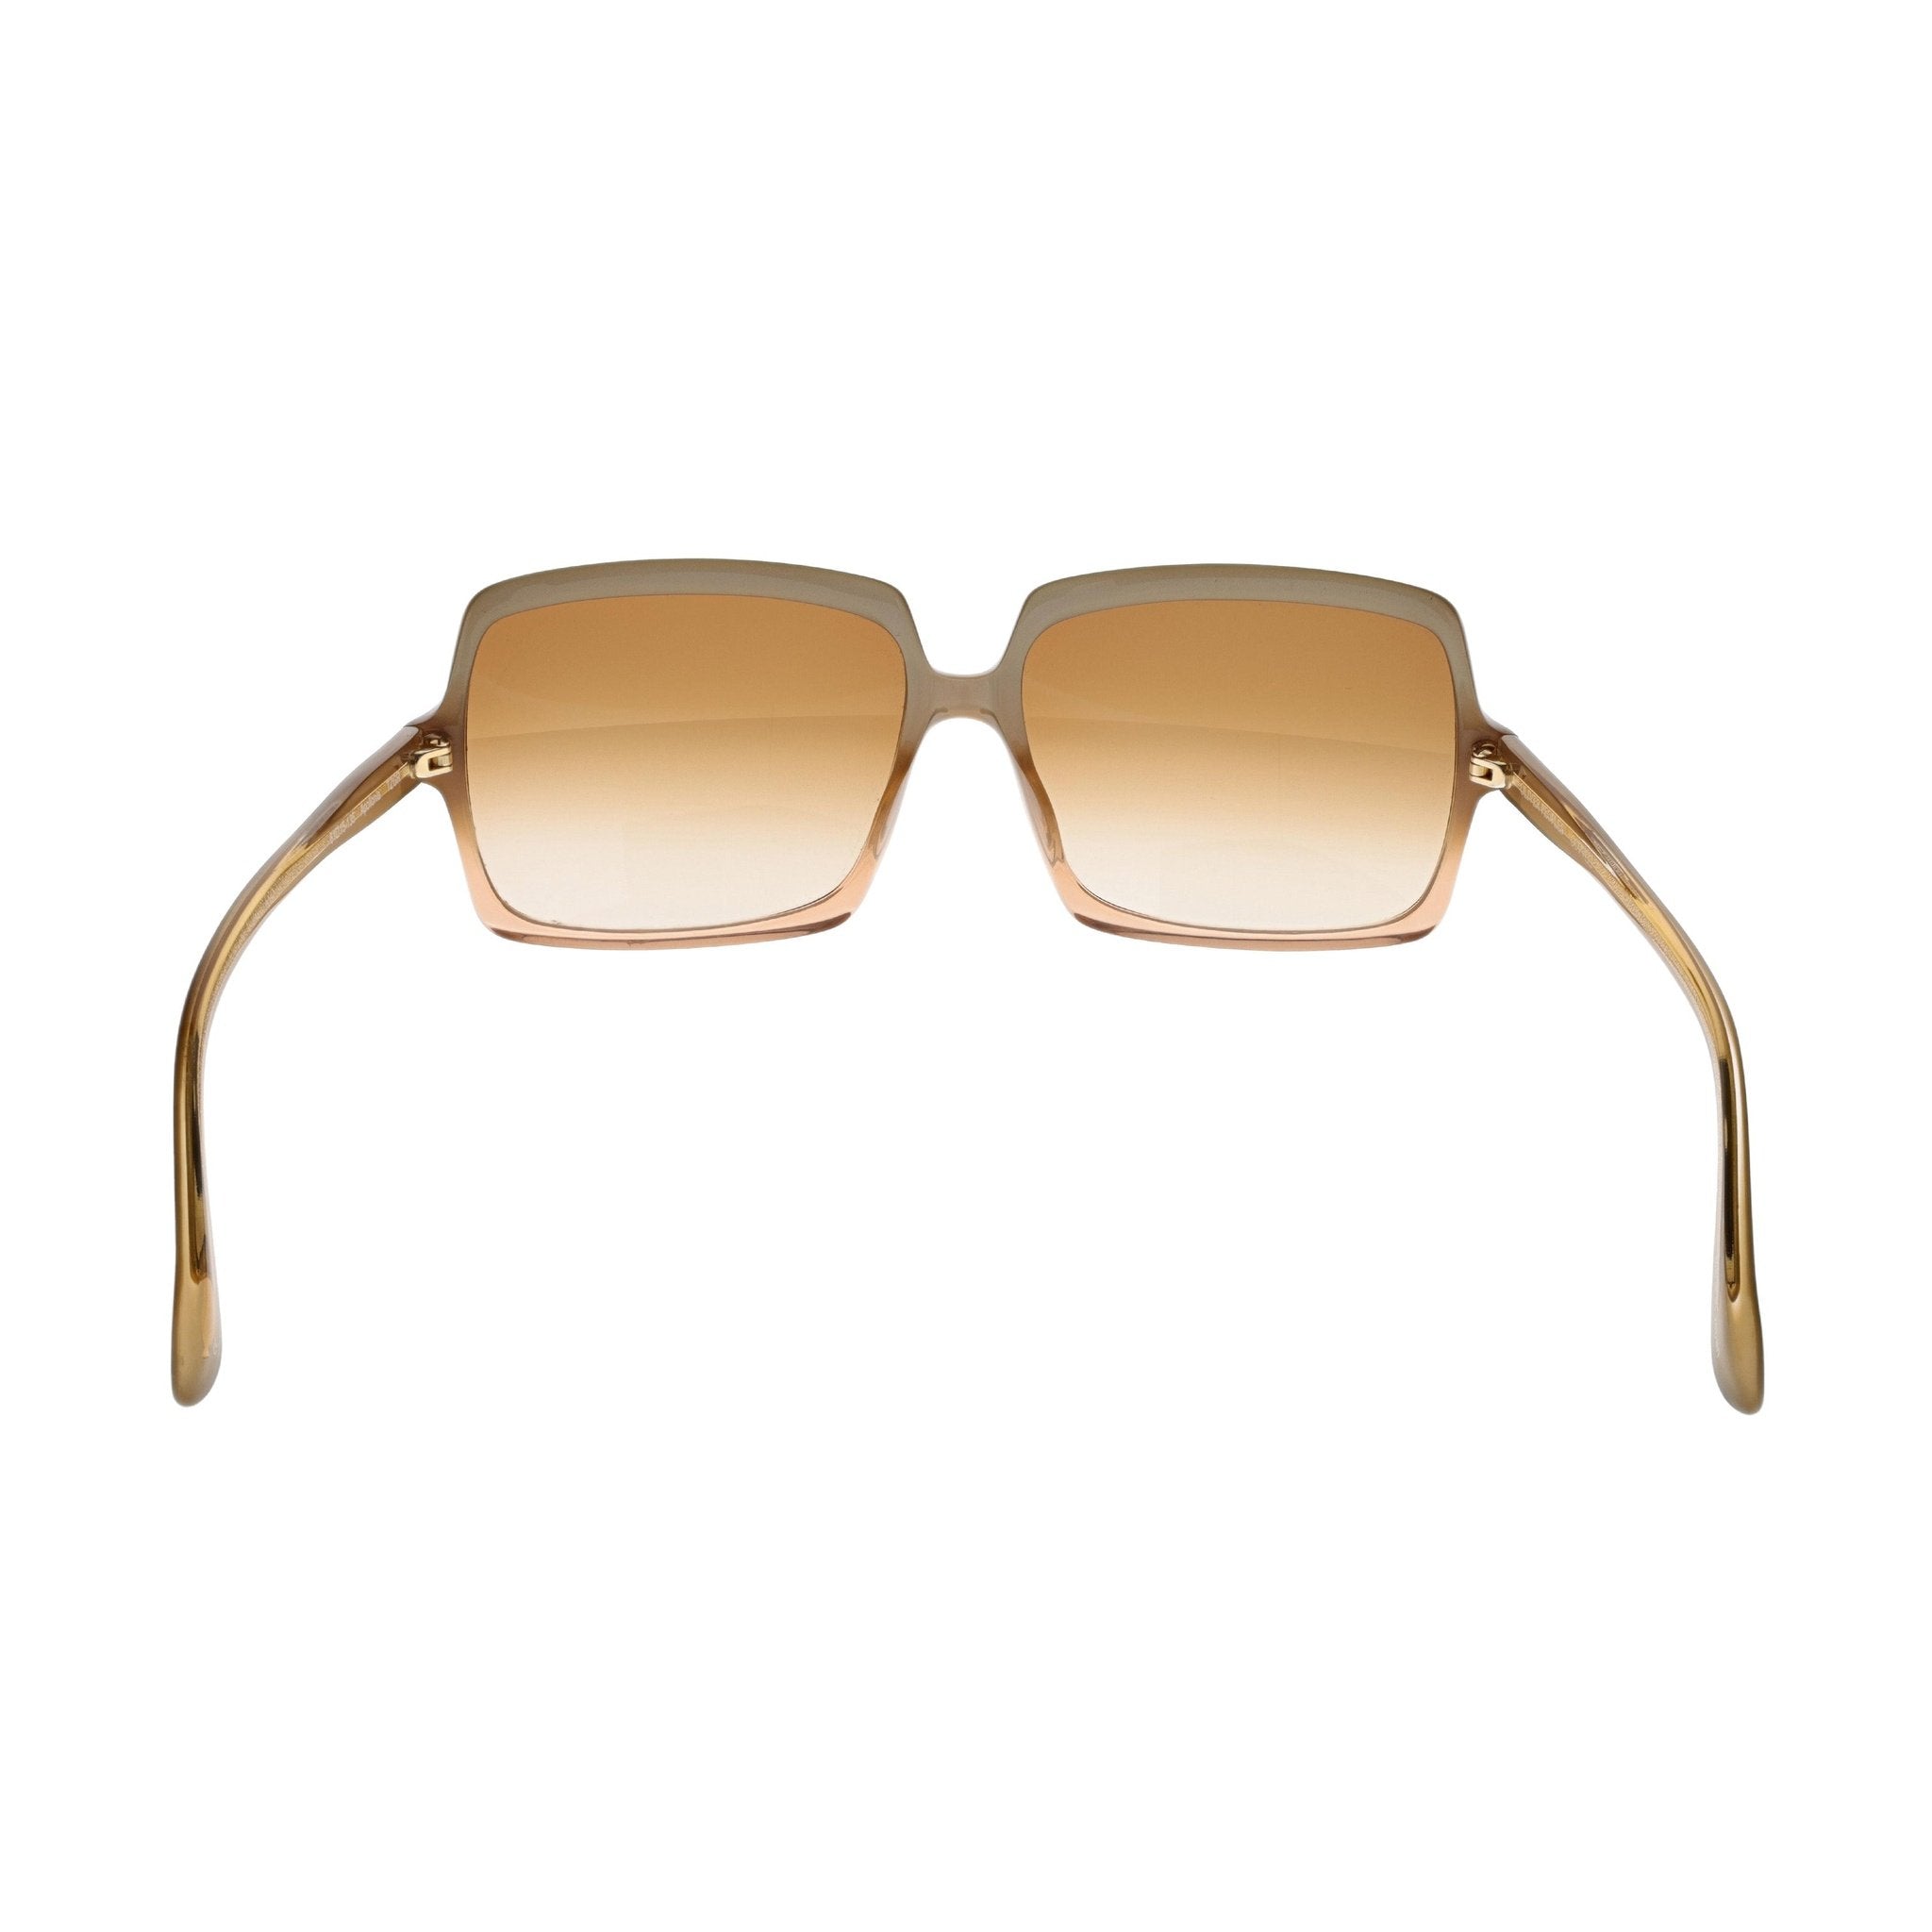 Oliver Peoples Apollonia Sunglasses